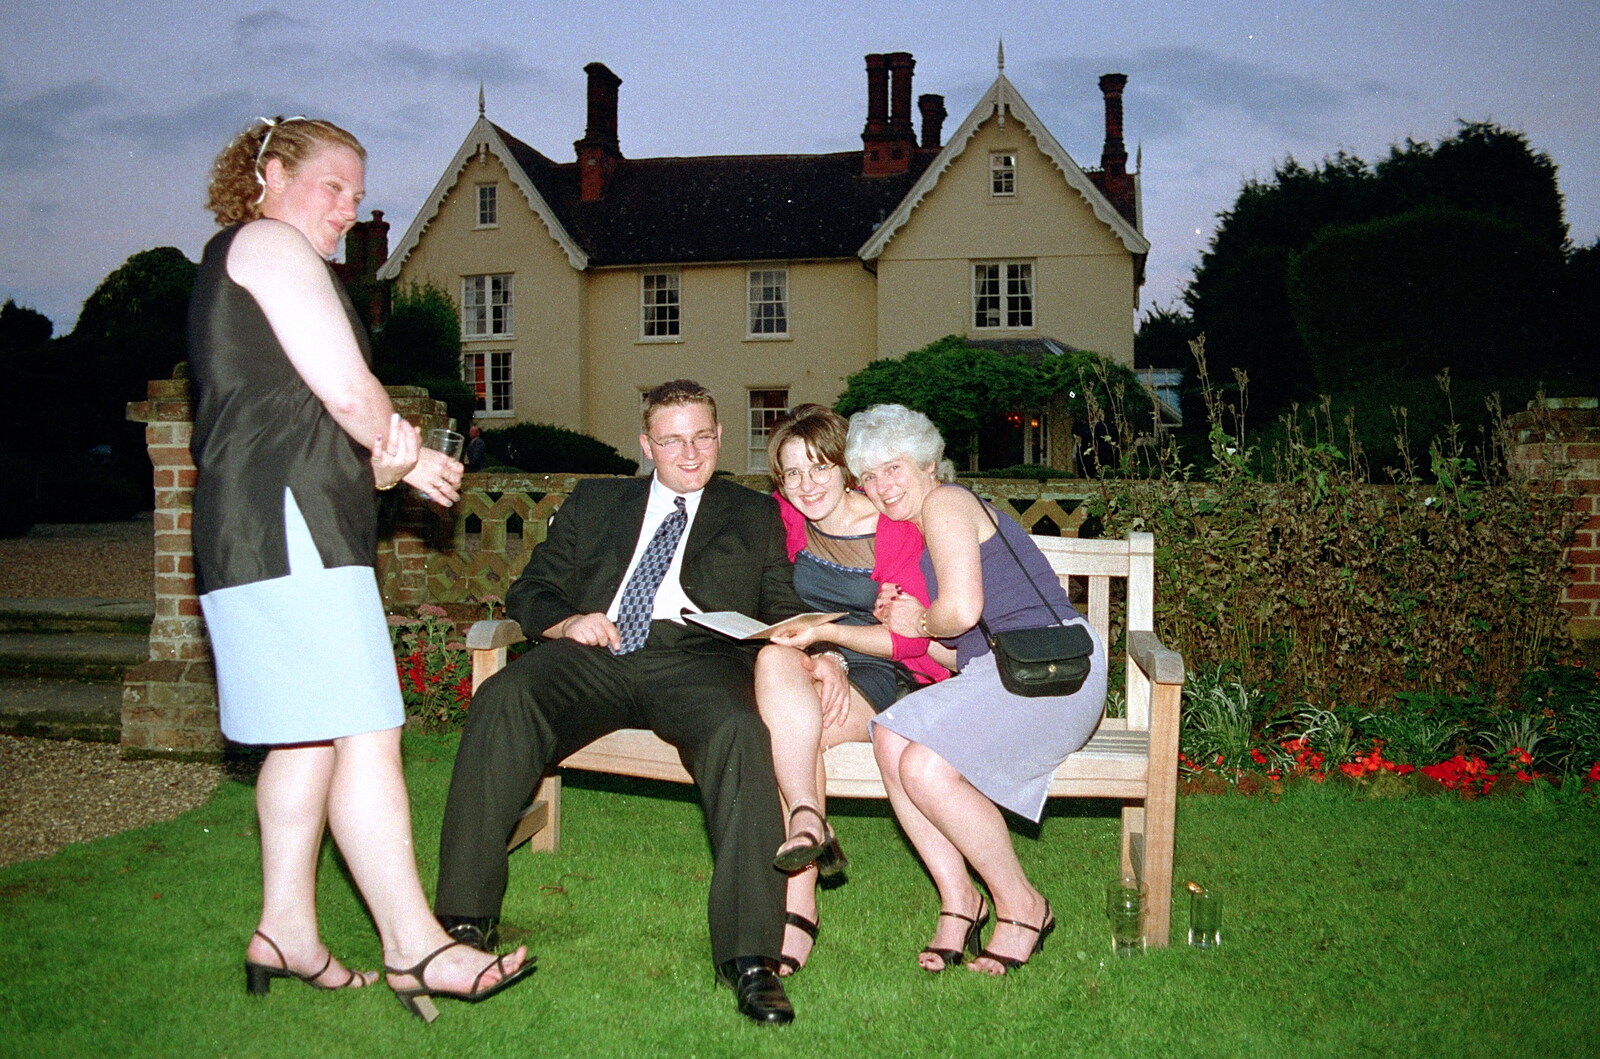 Outside in the dusk from Helen and Neil's Wedding, The Oaksmere, Brome, Suffolk - 4th August 2000